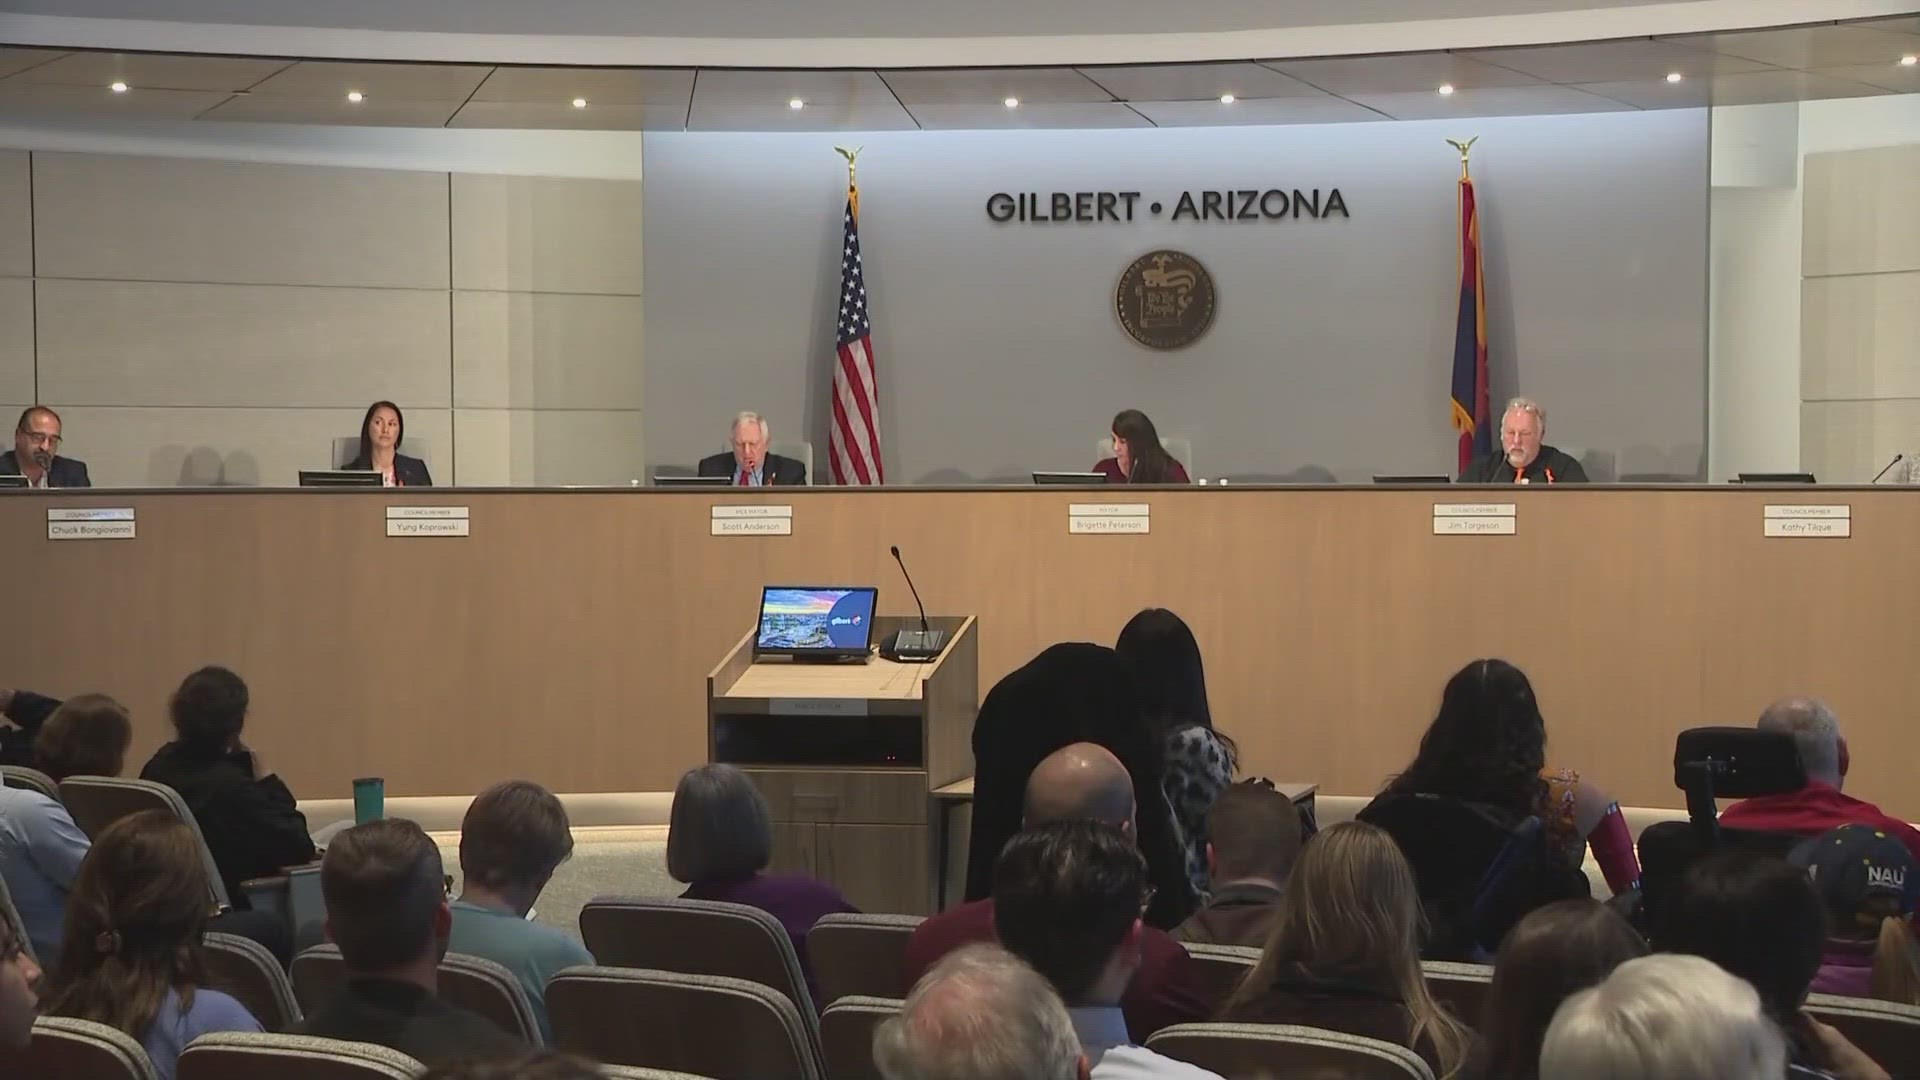 The Gilbert community came out in full force Tuesday evening, calling for answers and accountability in the teen violence investigations.